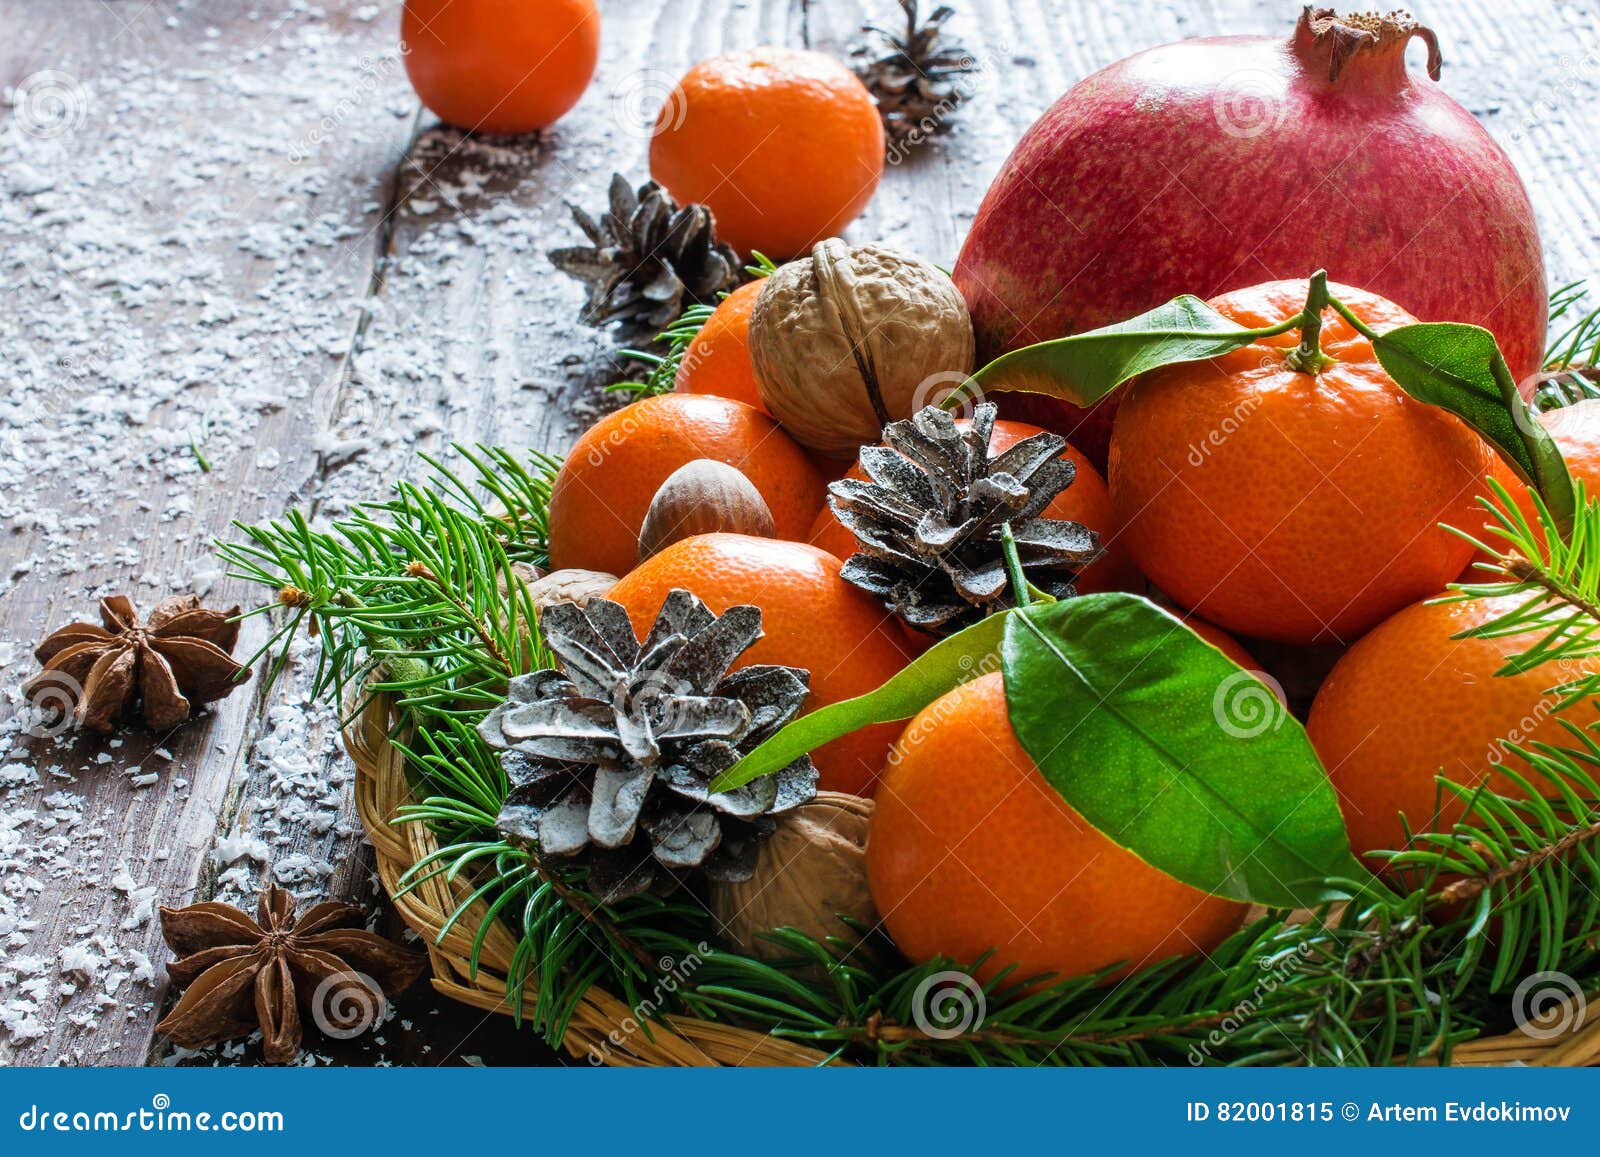 Tangerines,pomegranates, Nuts and Spices in a Wicker Bowl Stock Image ...